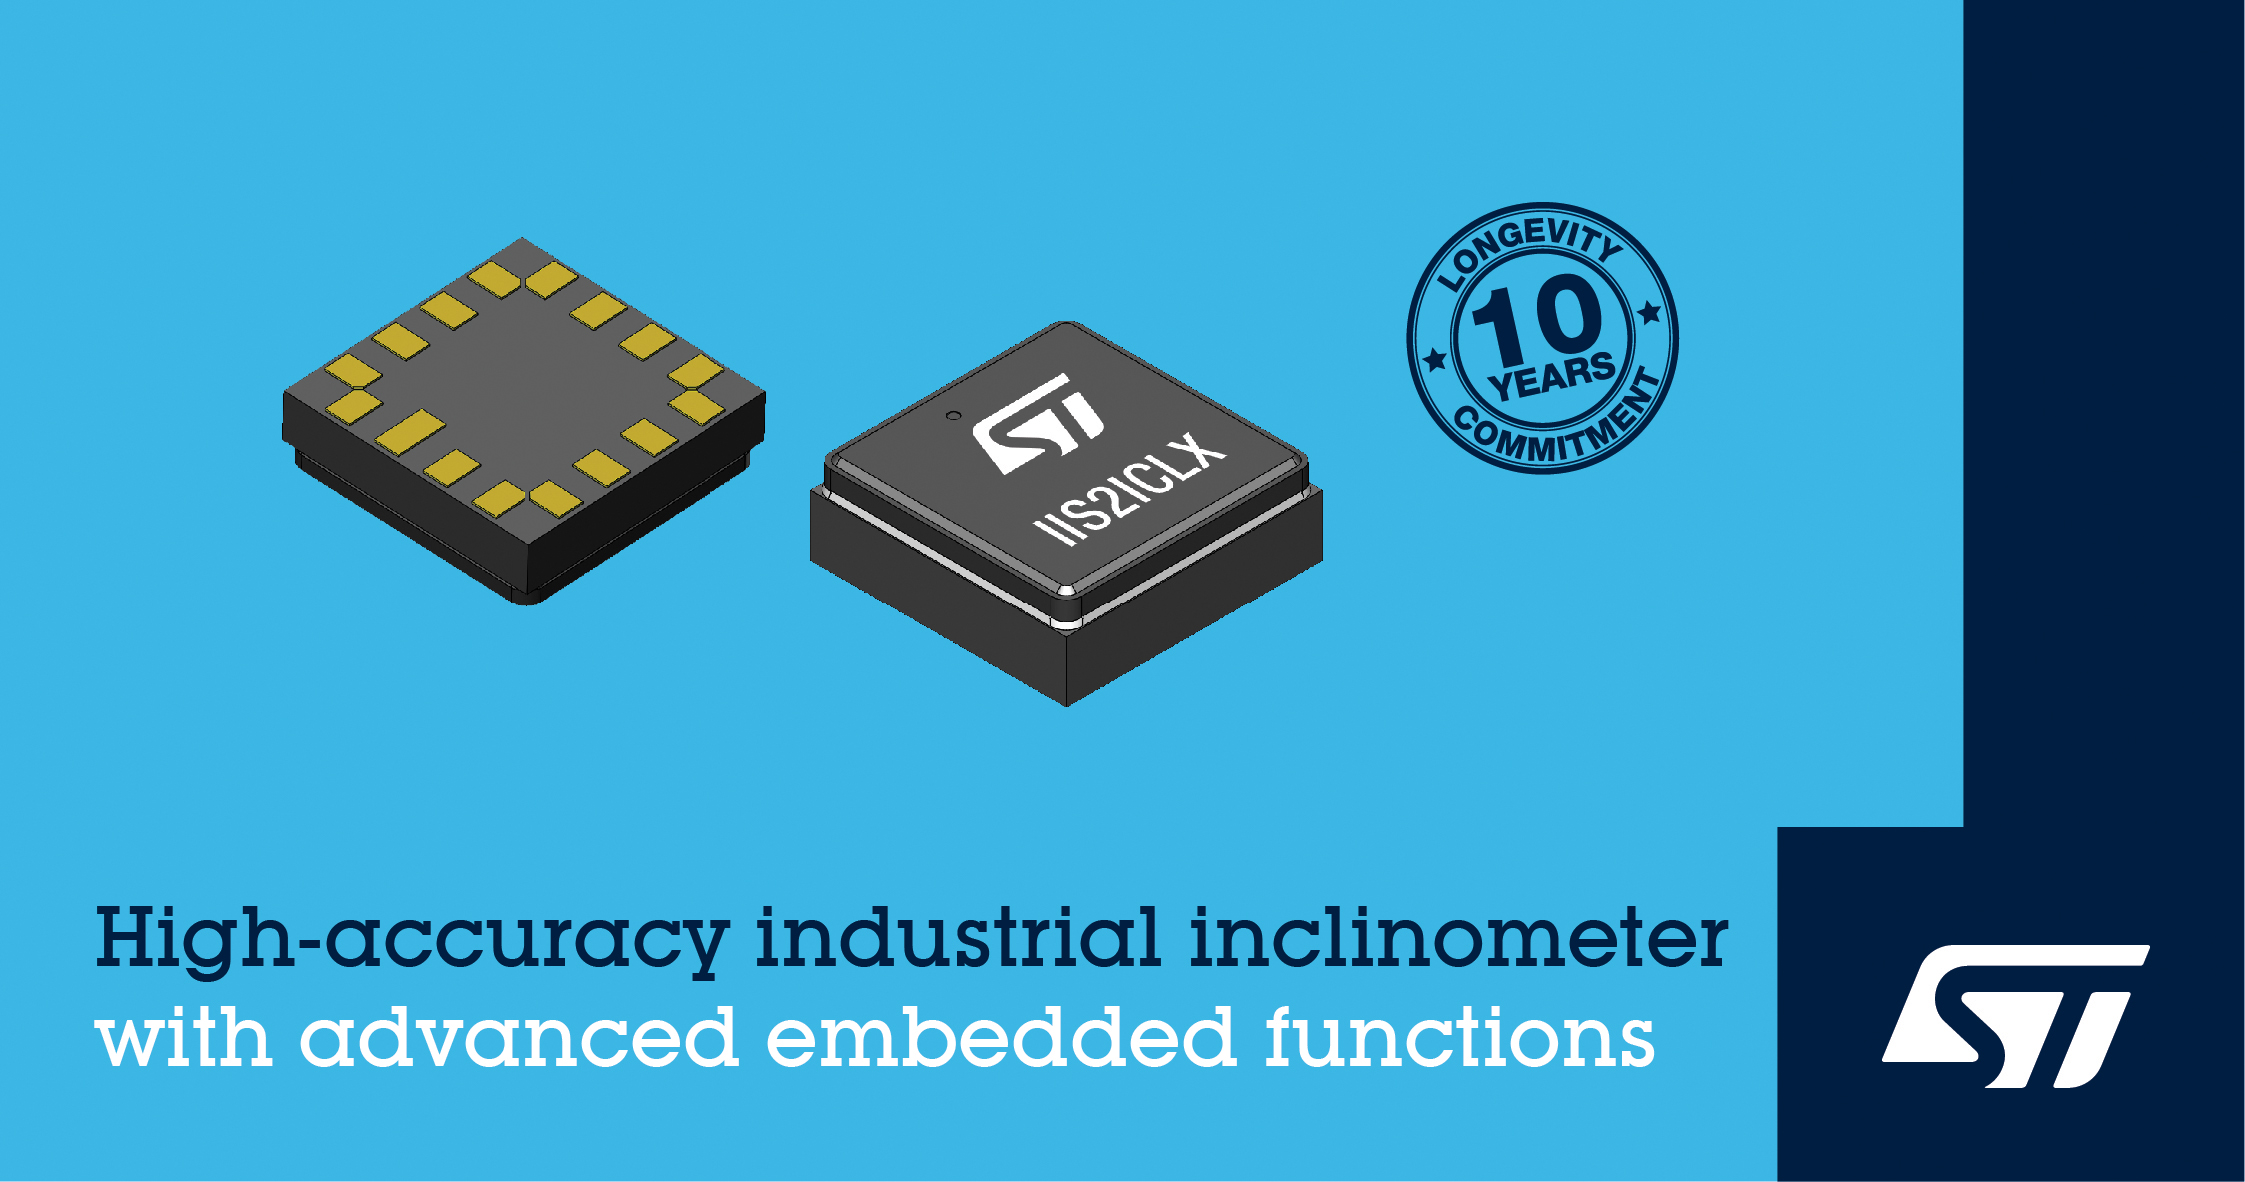 STMicroelectronics Launches High-Accuracy Inclinometer with Machine-Learning Core